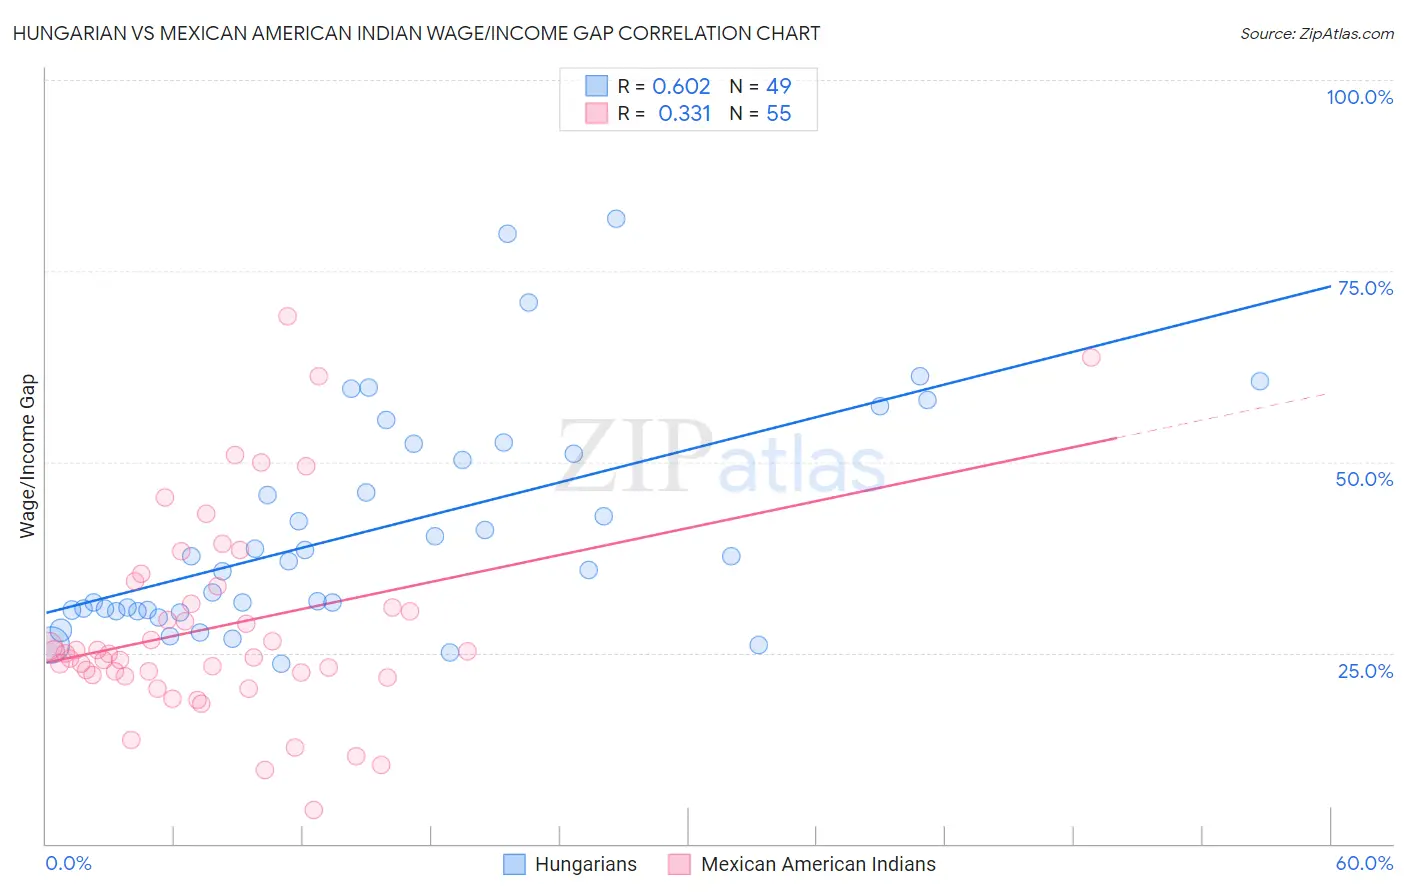 Hungarian vs Mexican American Indian Wage/Income Gap